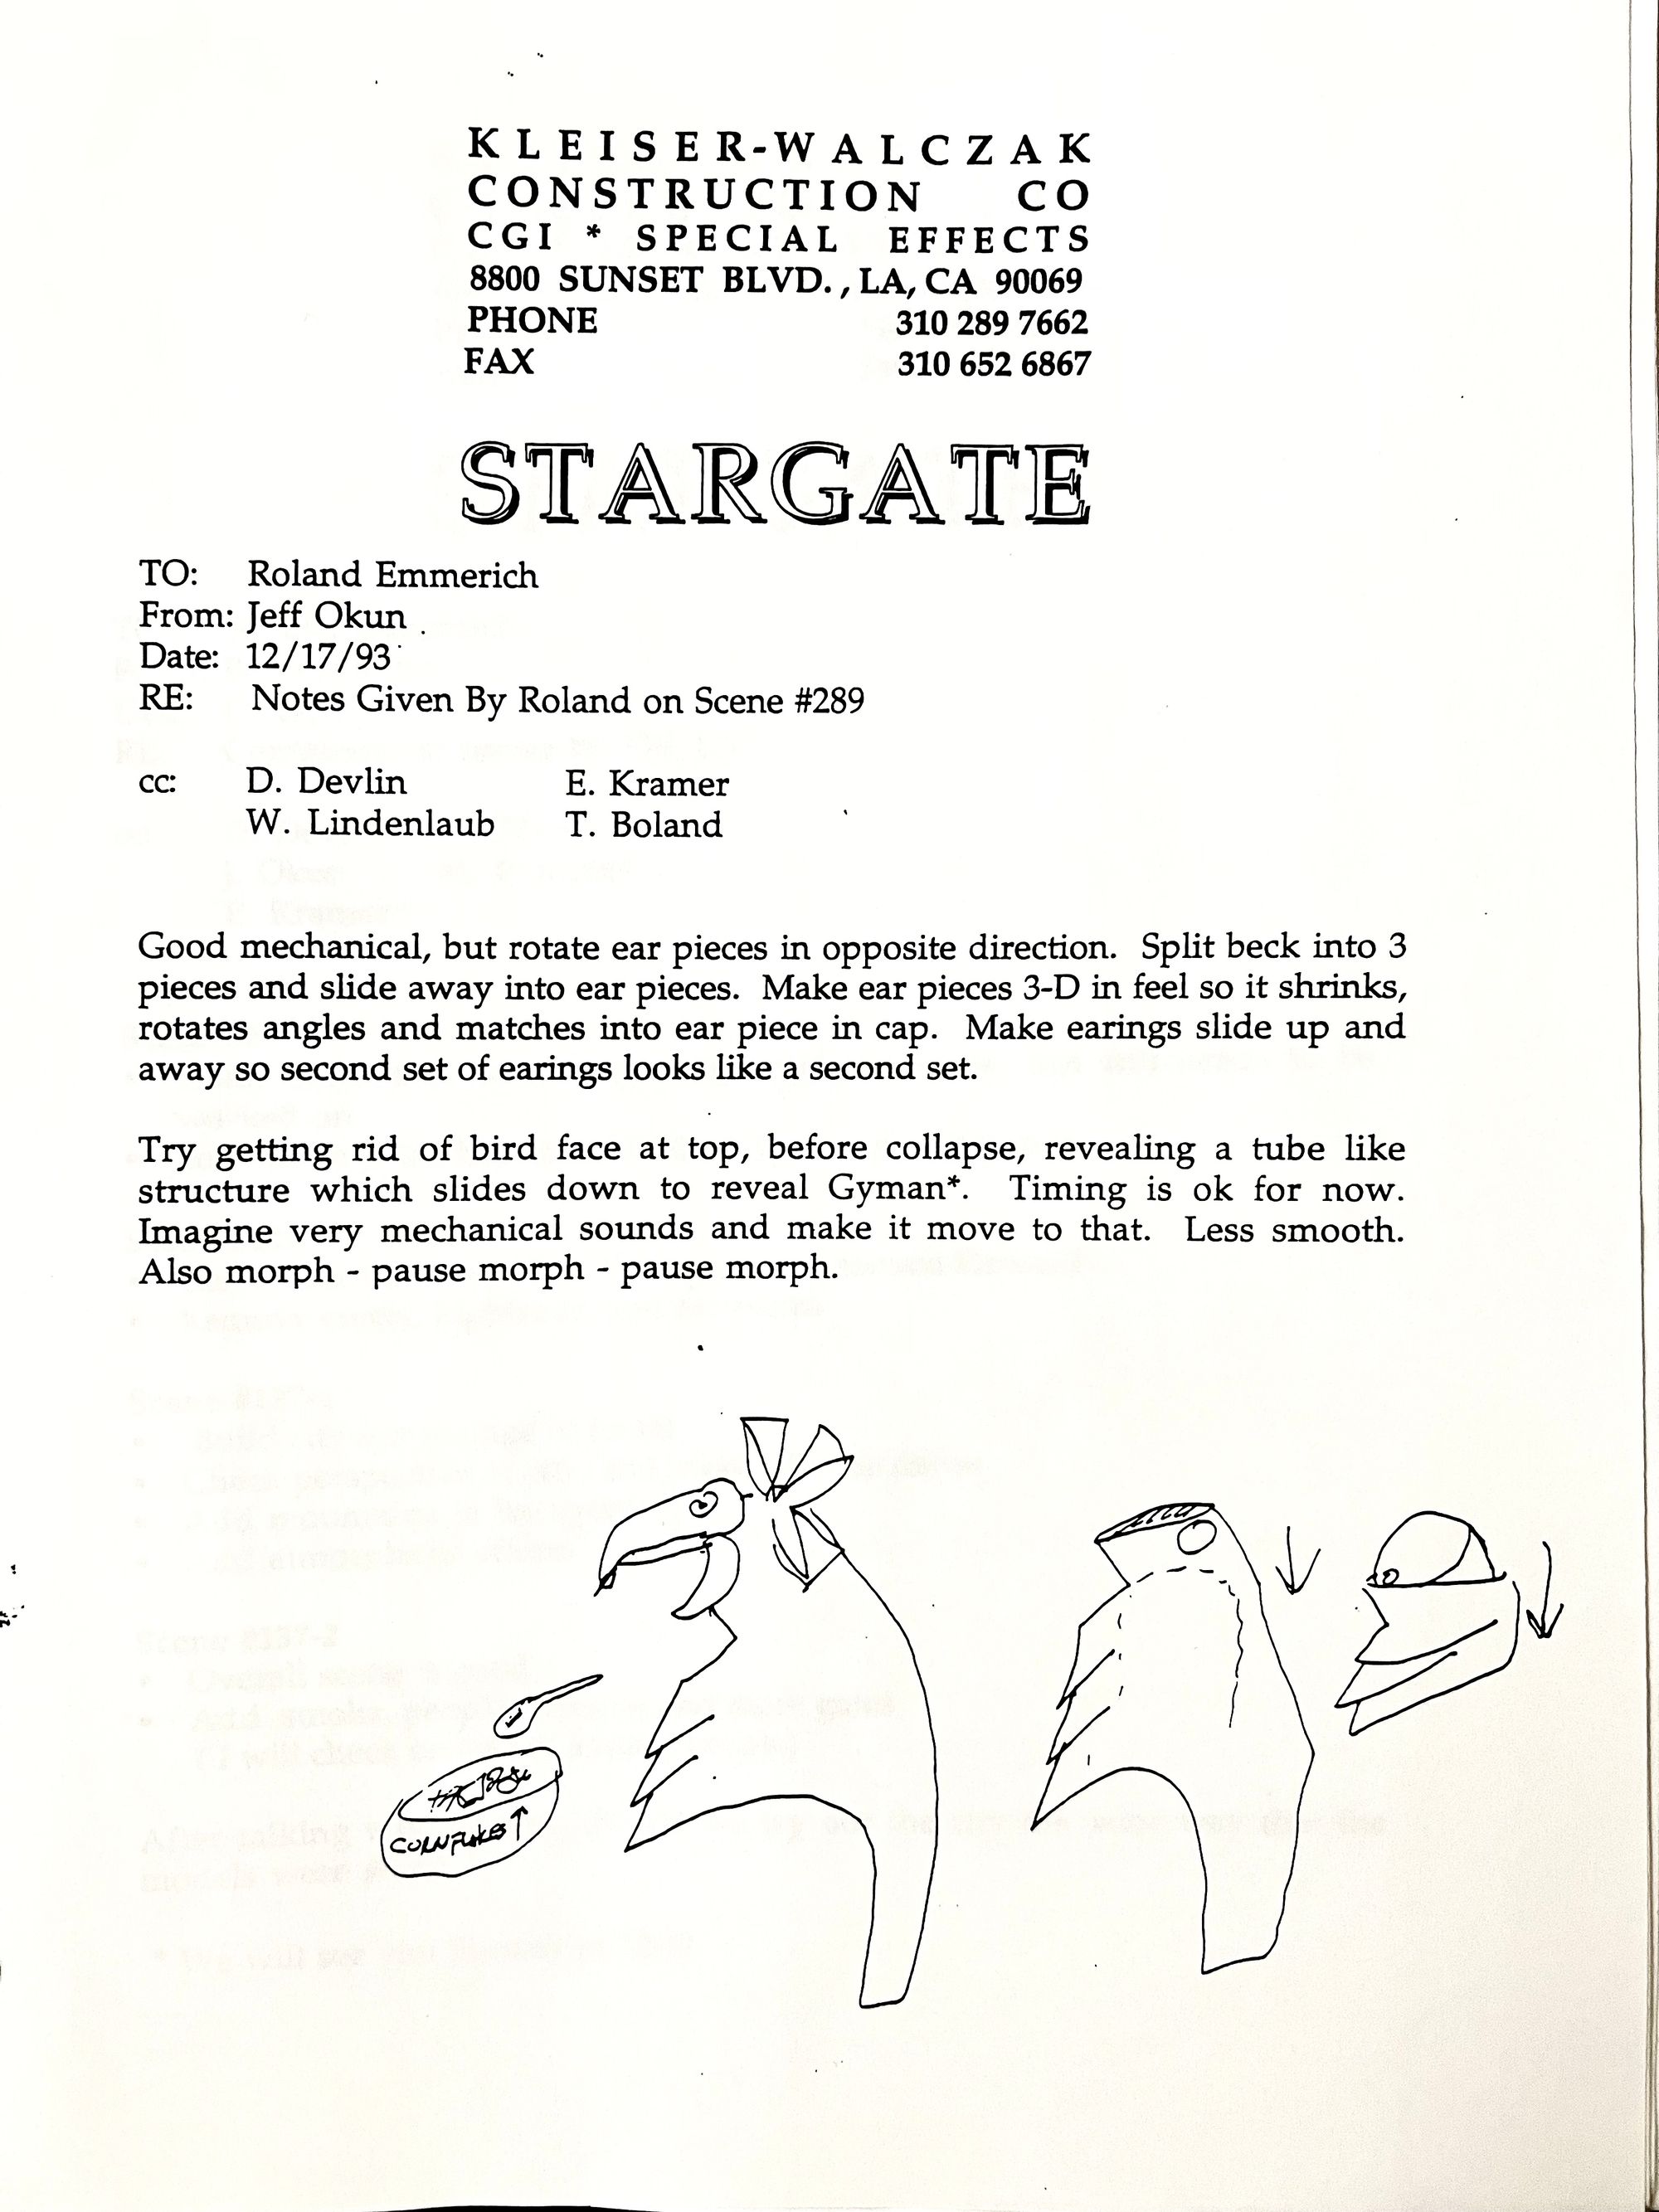 Stargate CGI Wizard Shares Rare Behind-the-Scenes Documents